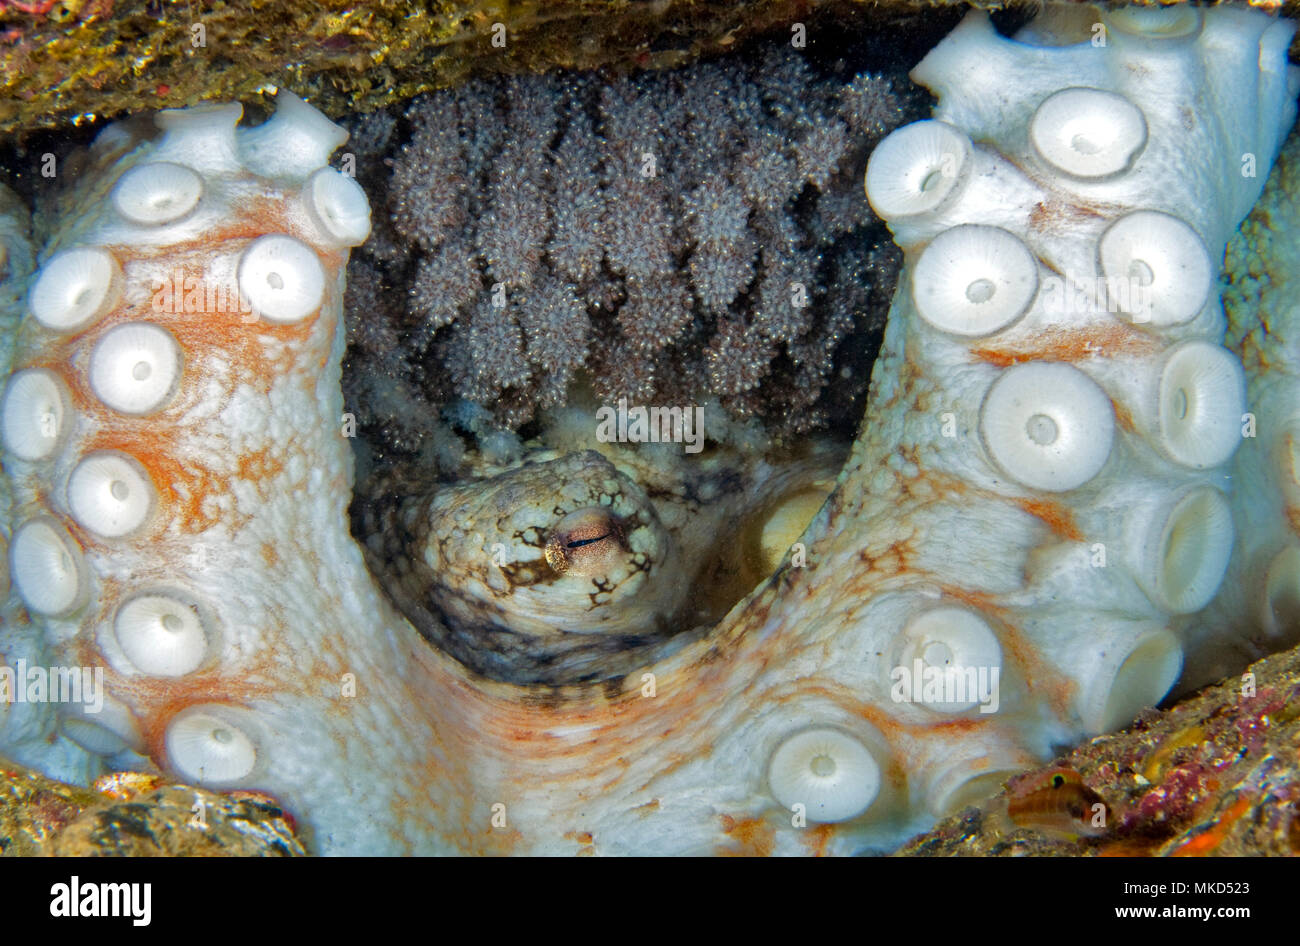 Detail of a putting egg of an octopus. Common Octopus (Octopus vulgaris), Tenerife, Canary Islands Stock Photo